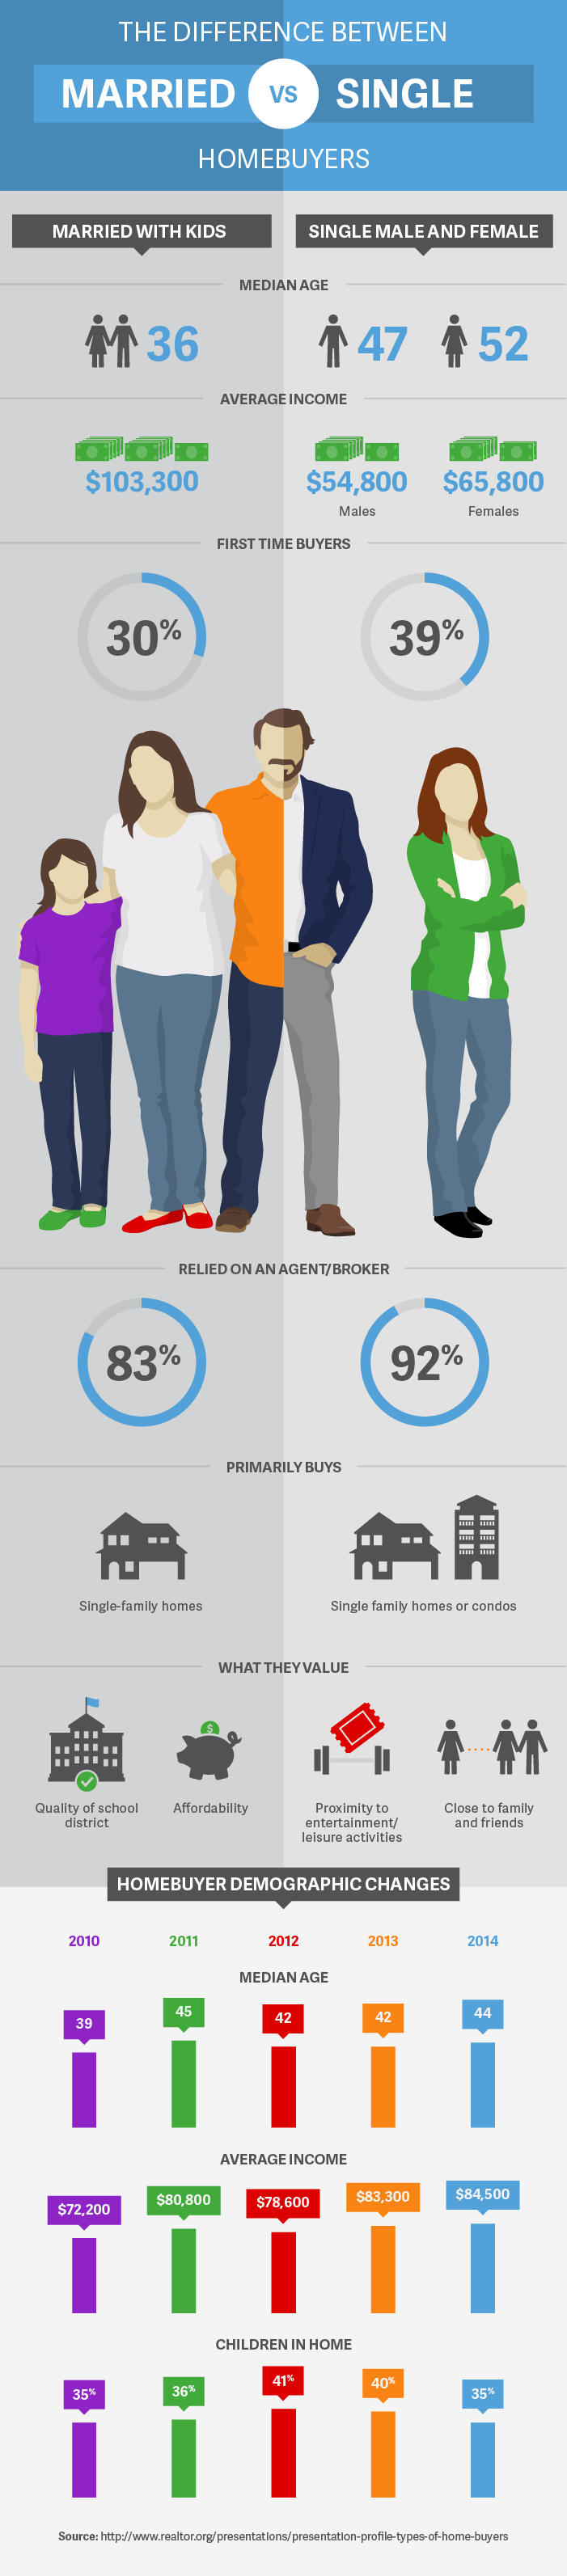 homebuyer-differences